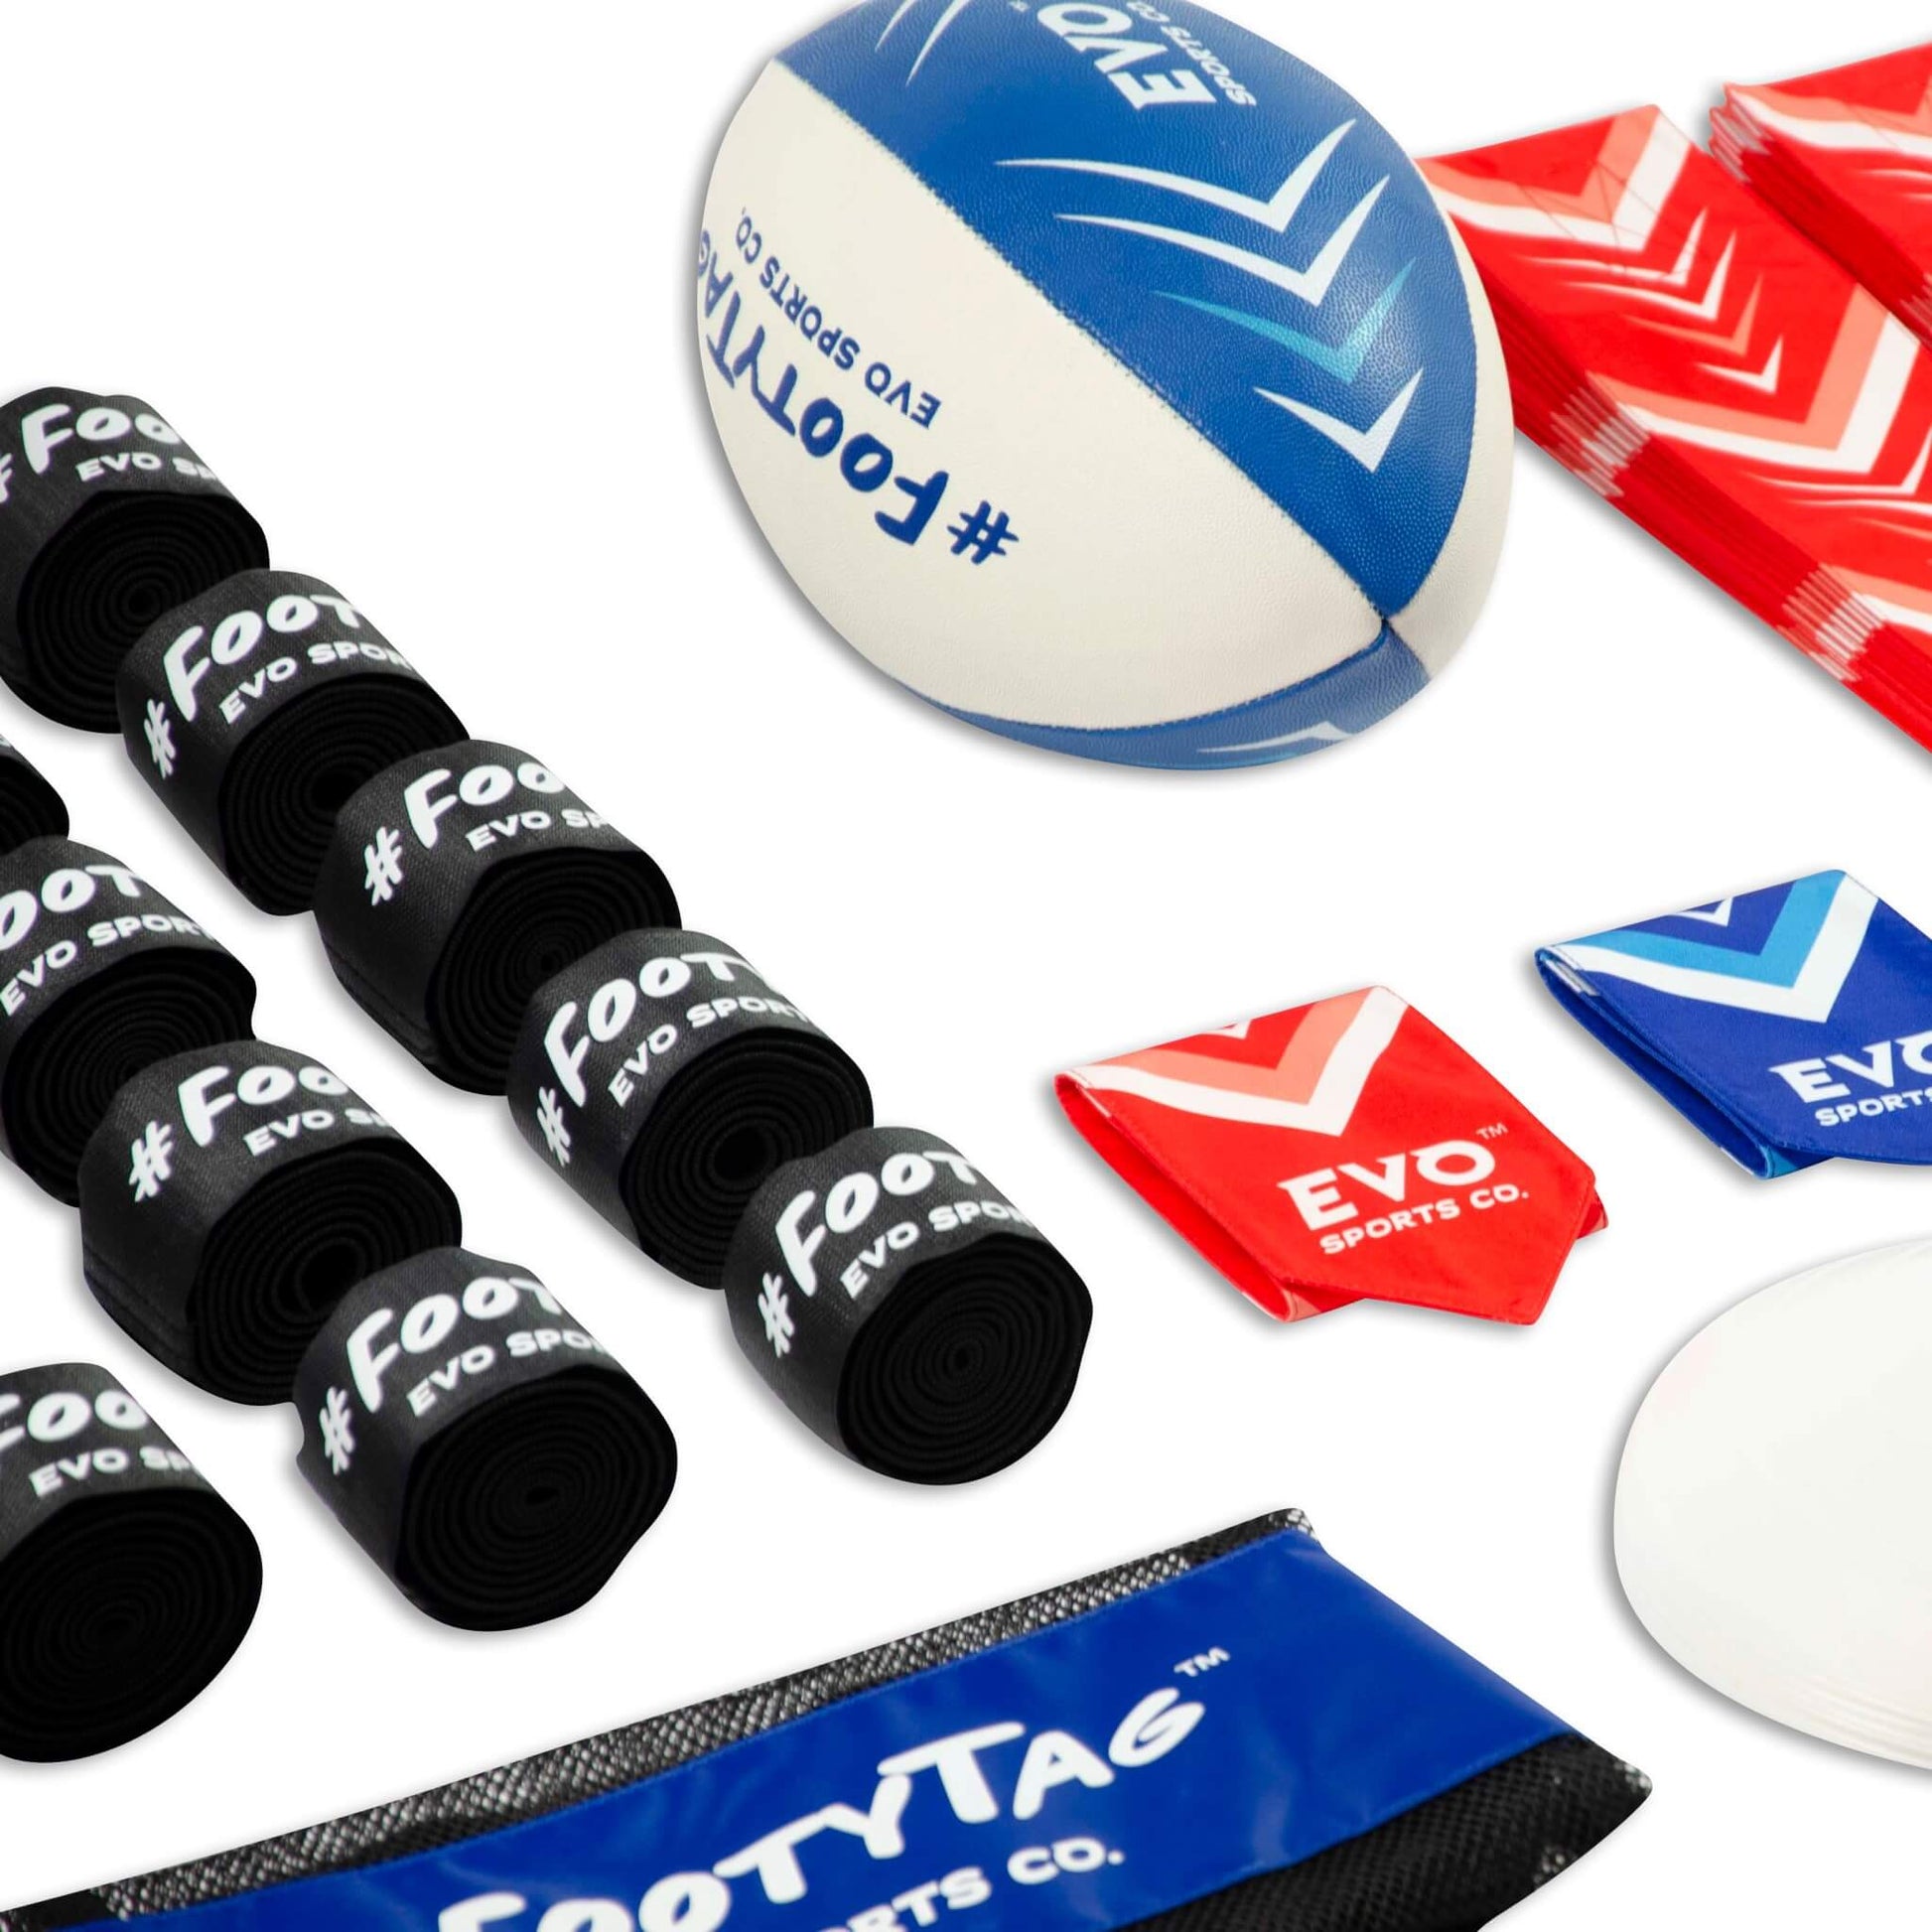 FootyTag - Kids Tag Rugby Kit - 20 Players - Evo Sports Co